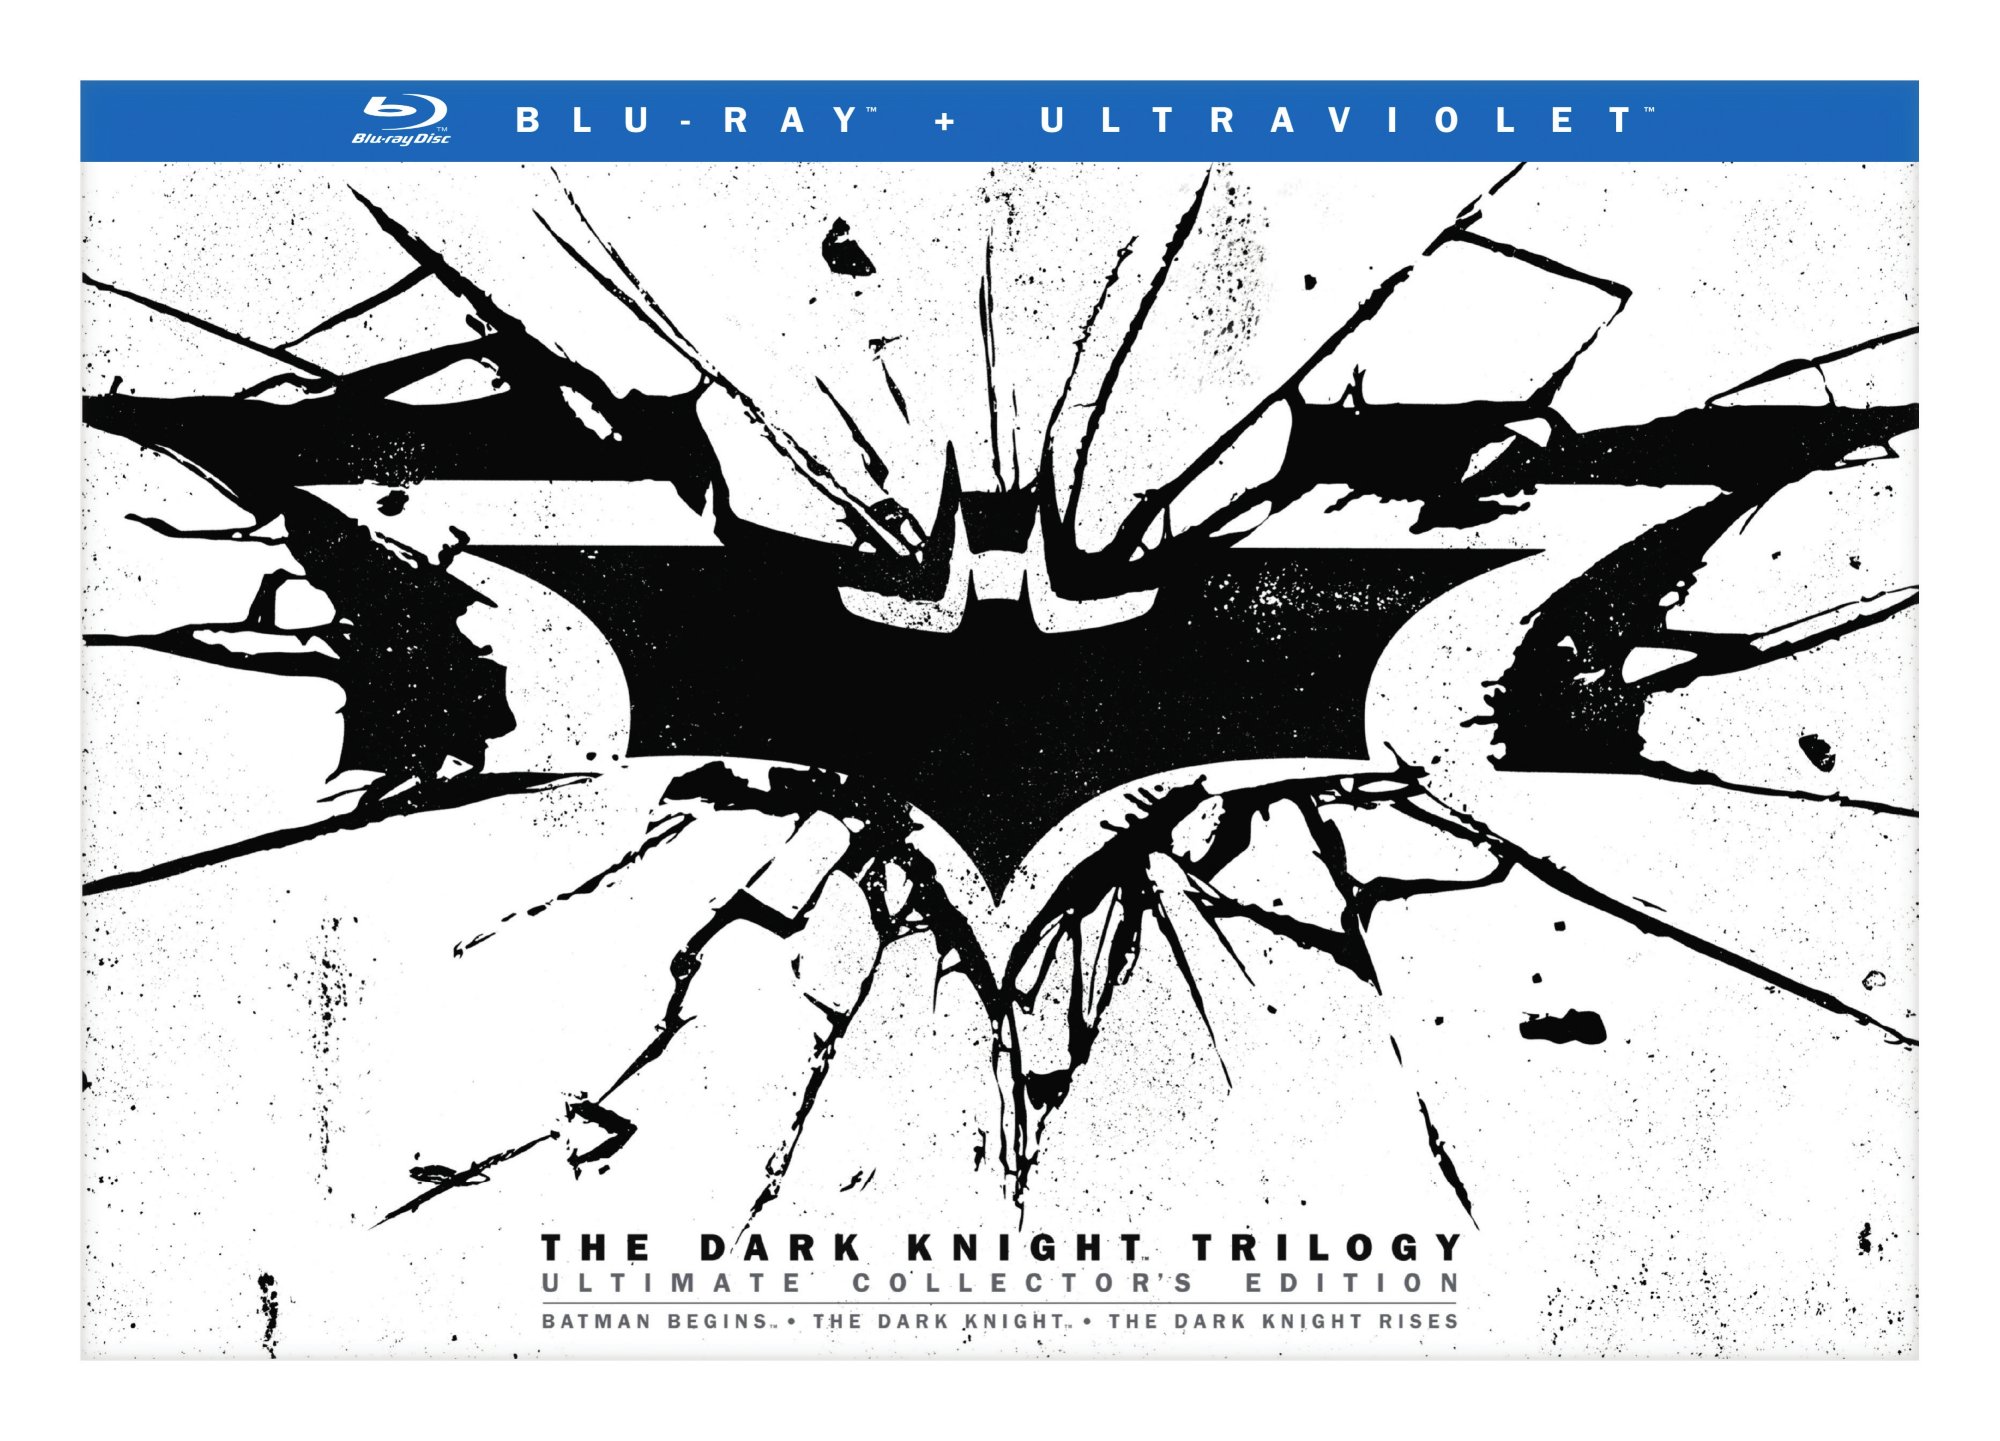 The Dark Knight Trilogy (Collector's Edition) - Blu-ray [ 2012 ]  - Action Movies On Blu-ray - Movies On GRUV